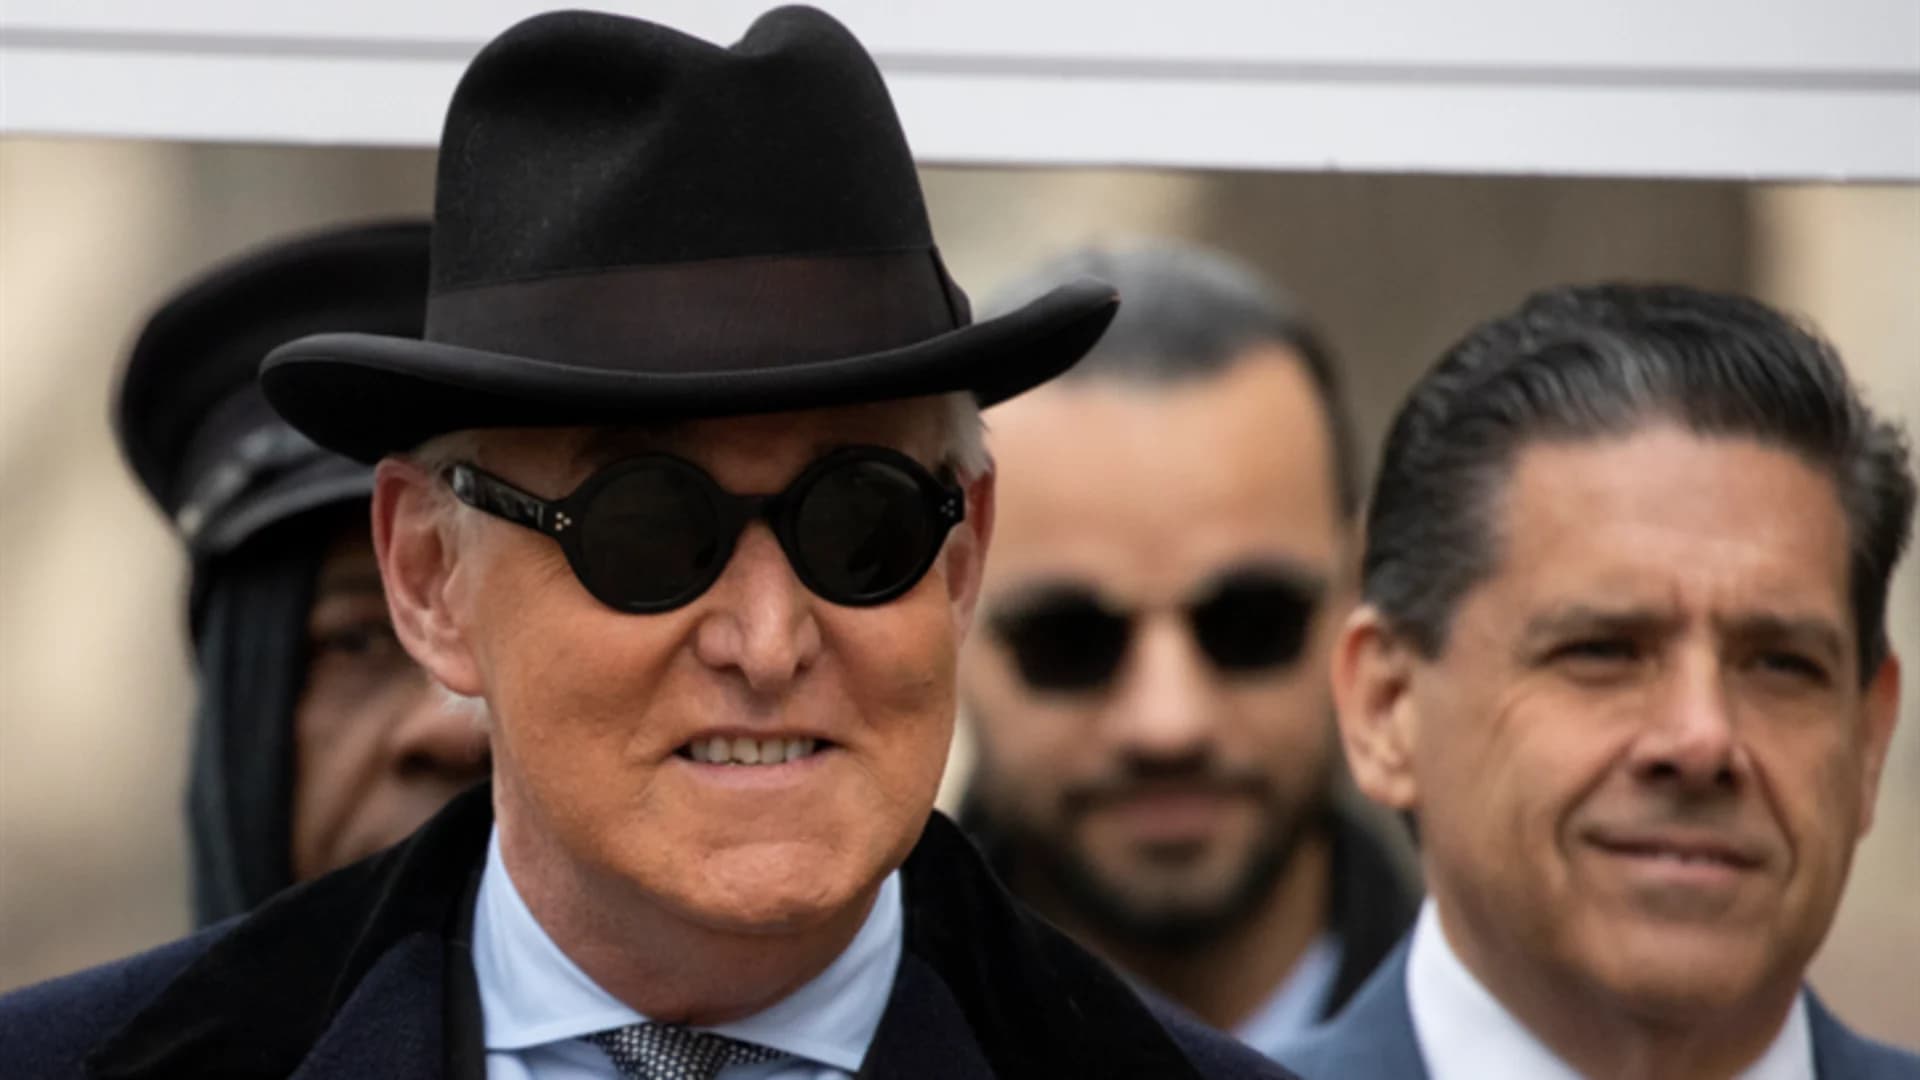 Roger Stone, staunch President Trump ally, gets 40-month sentence